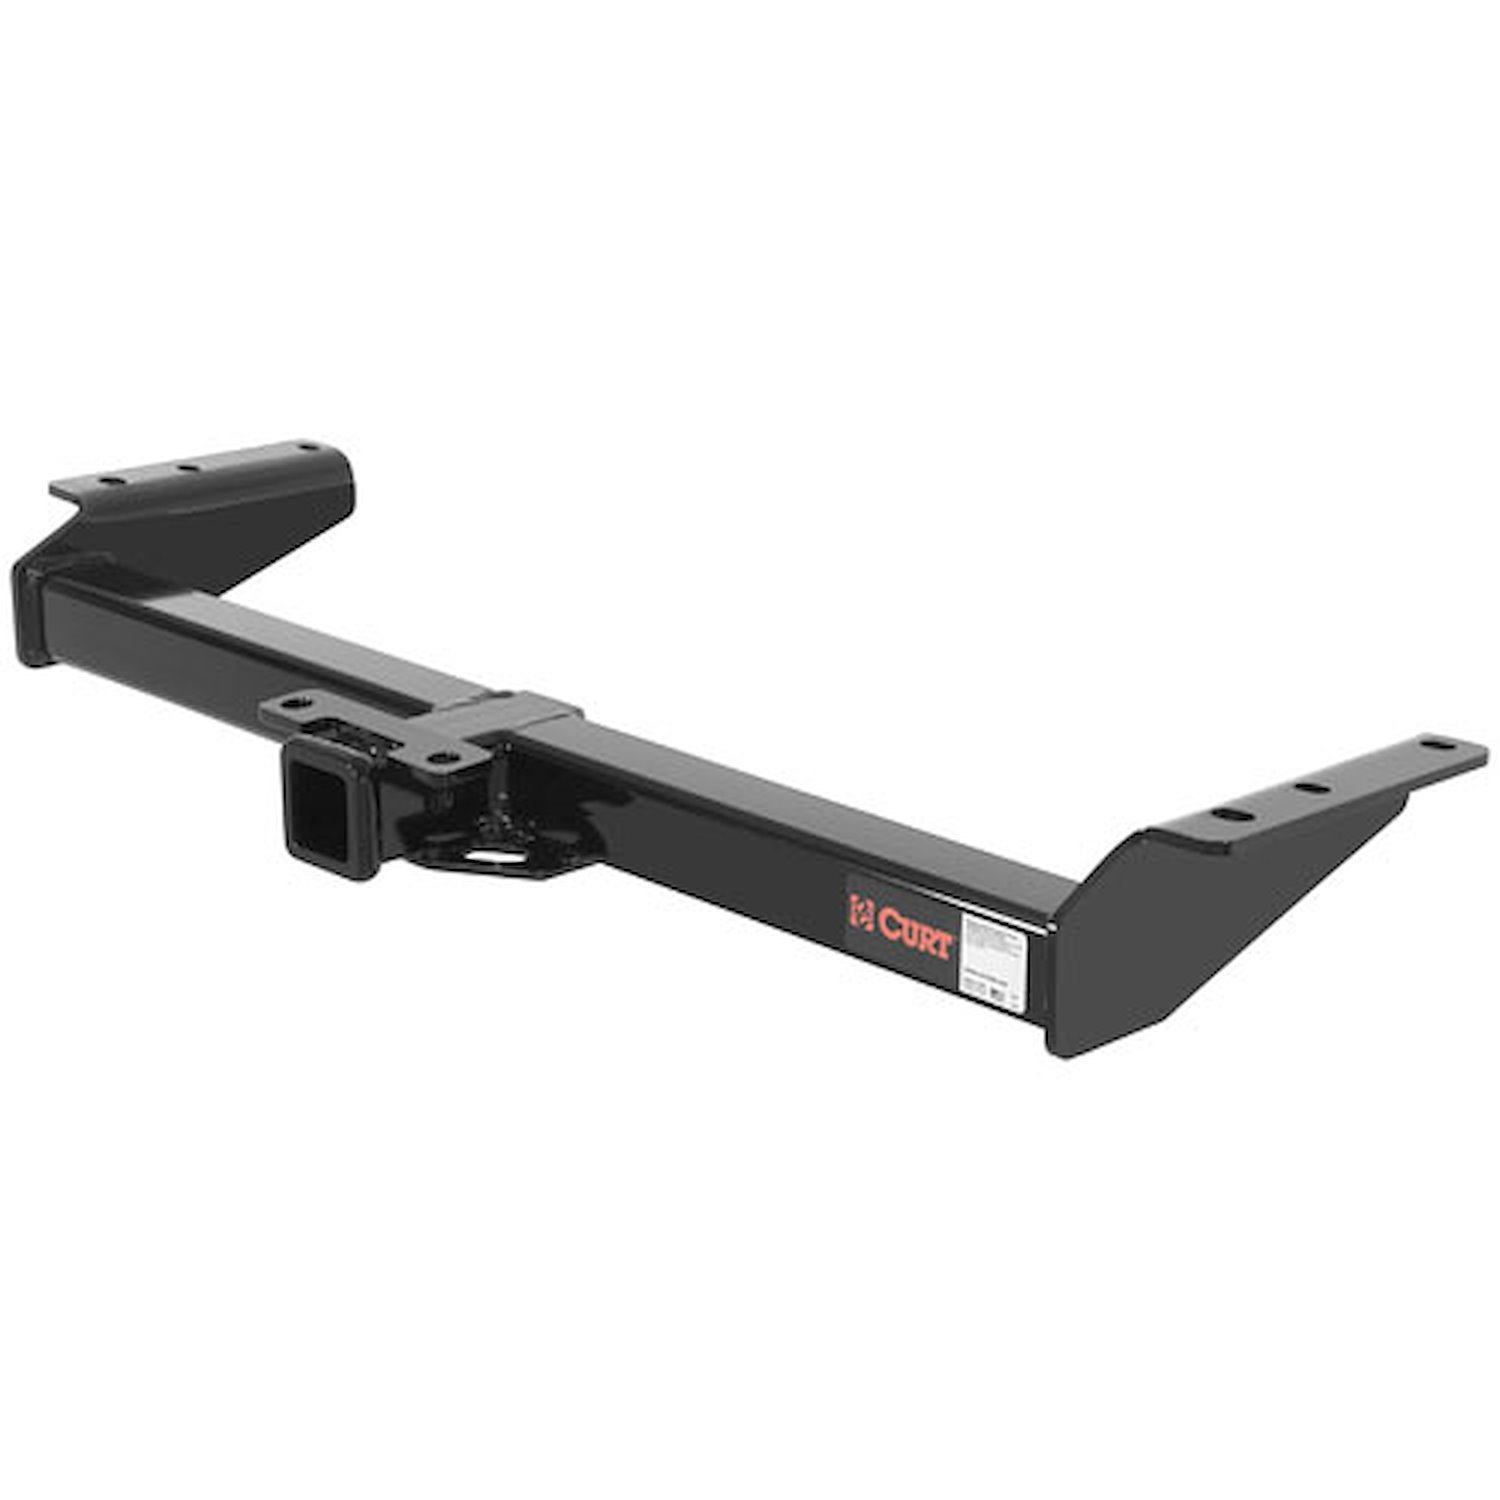 Class 4 Receiver Hitch 2000-02 GM Full-Size SUV